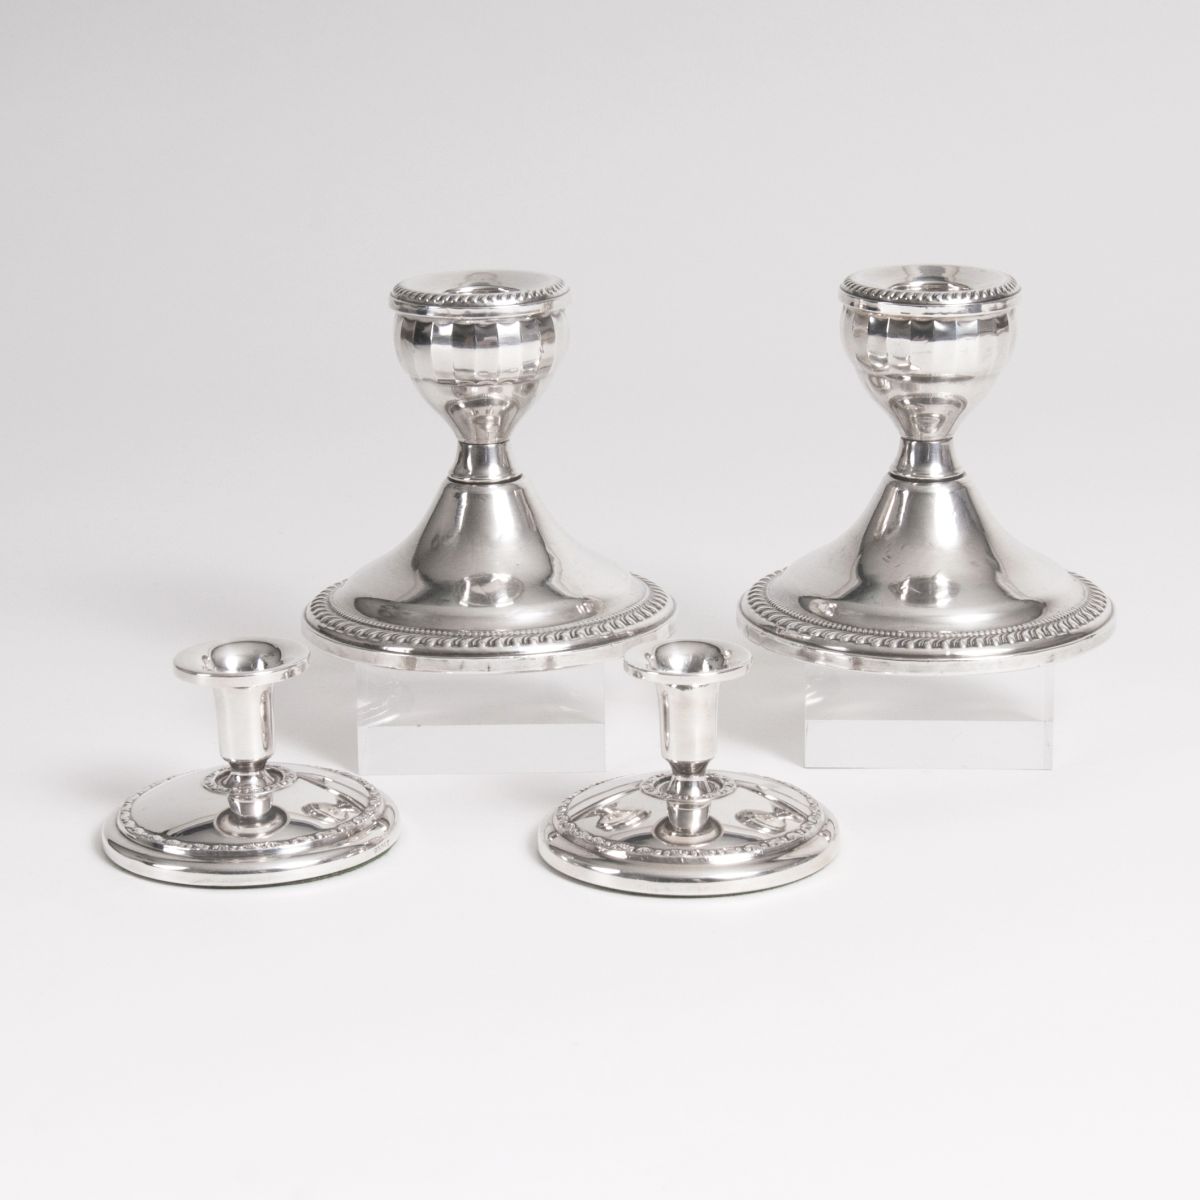 Two pairs of small table candle holders